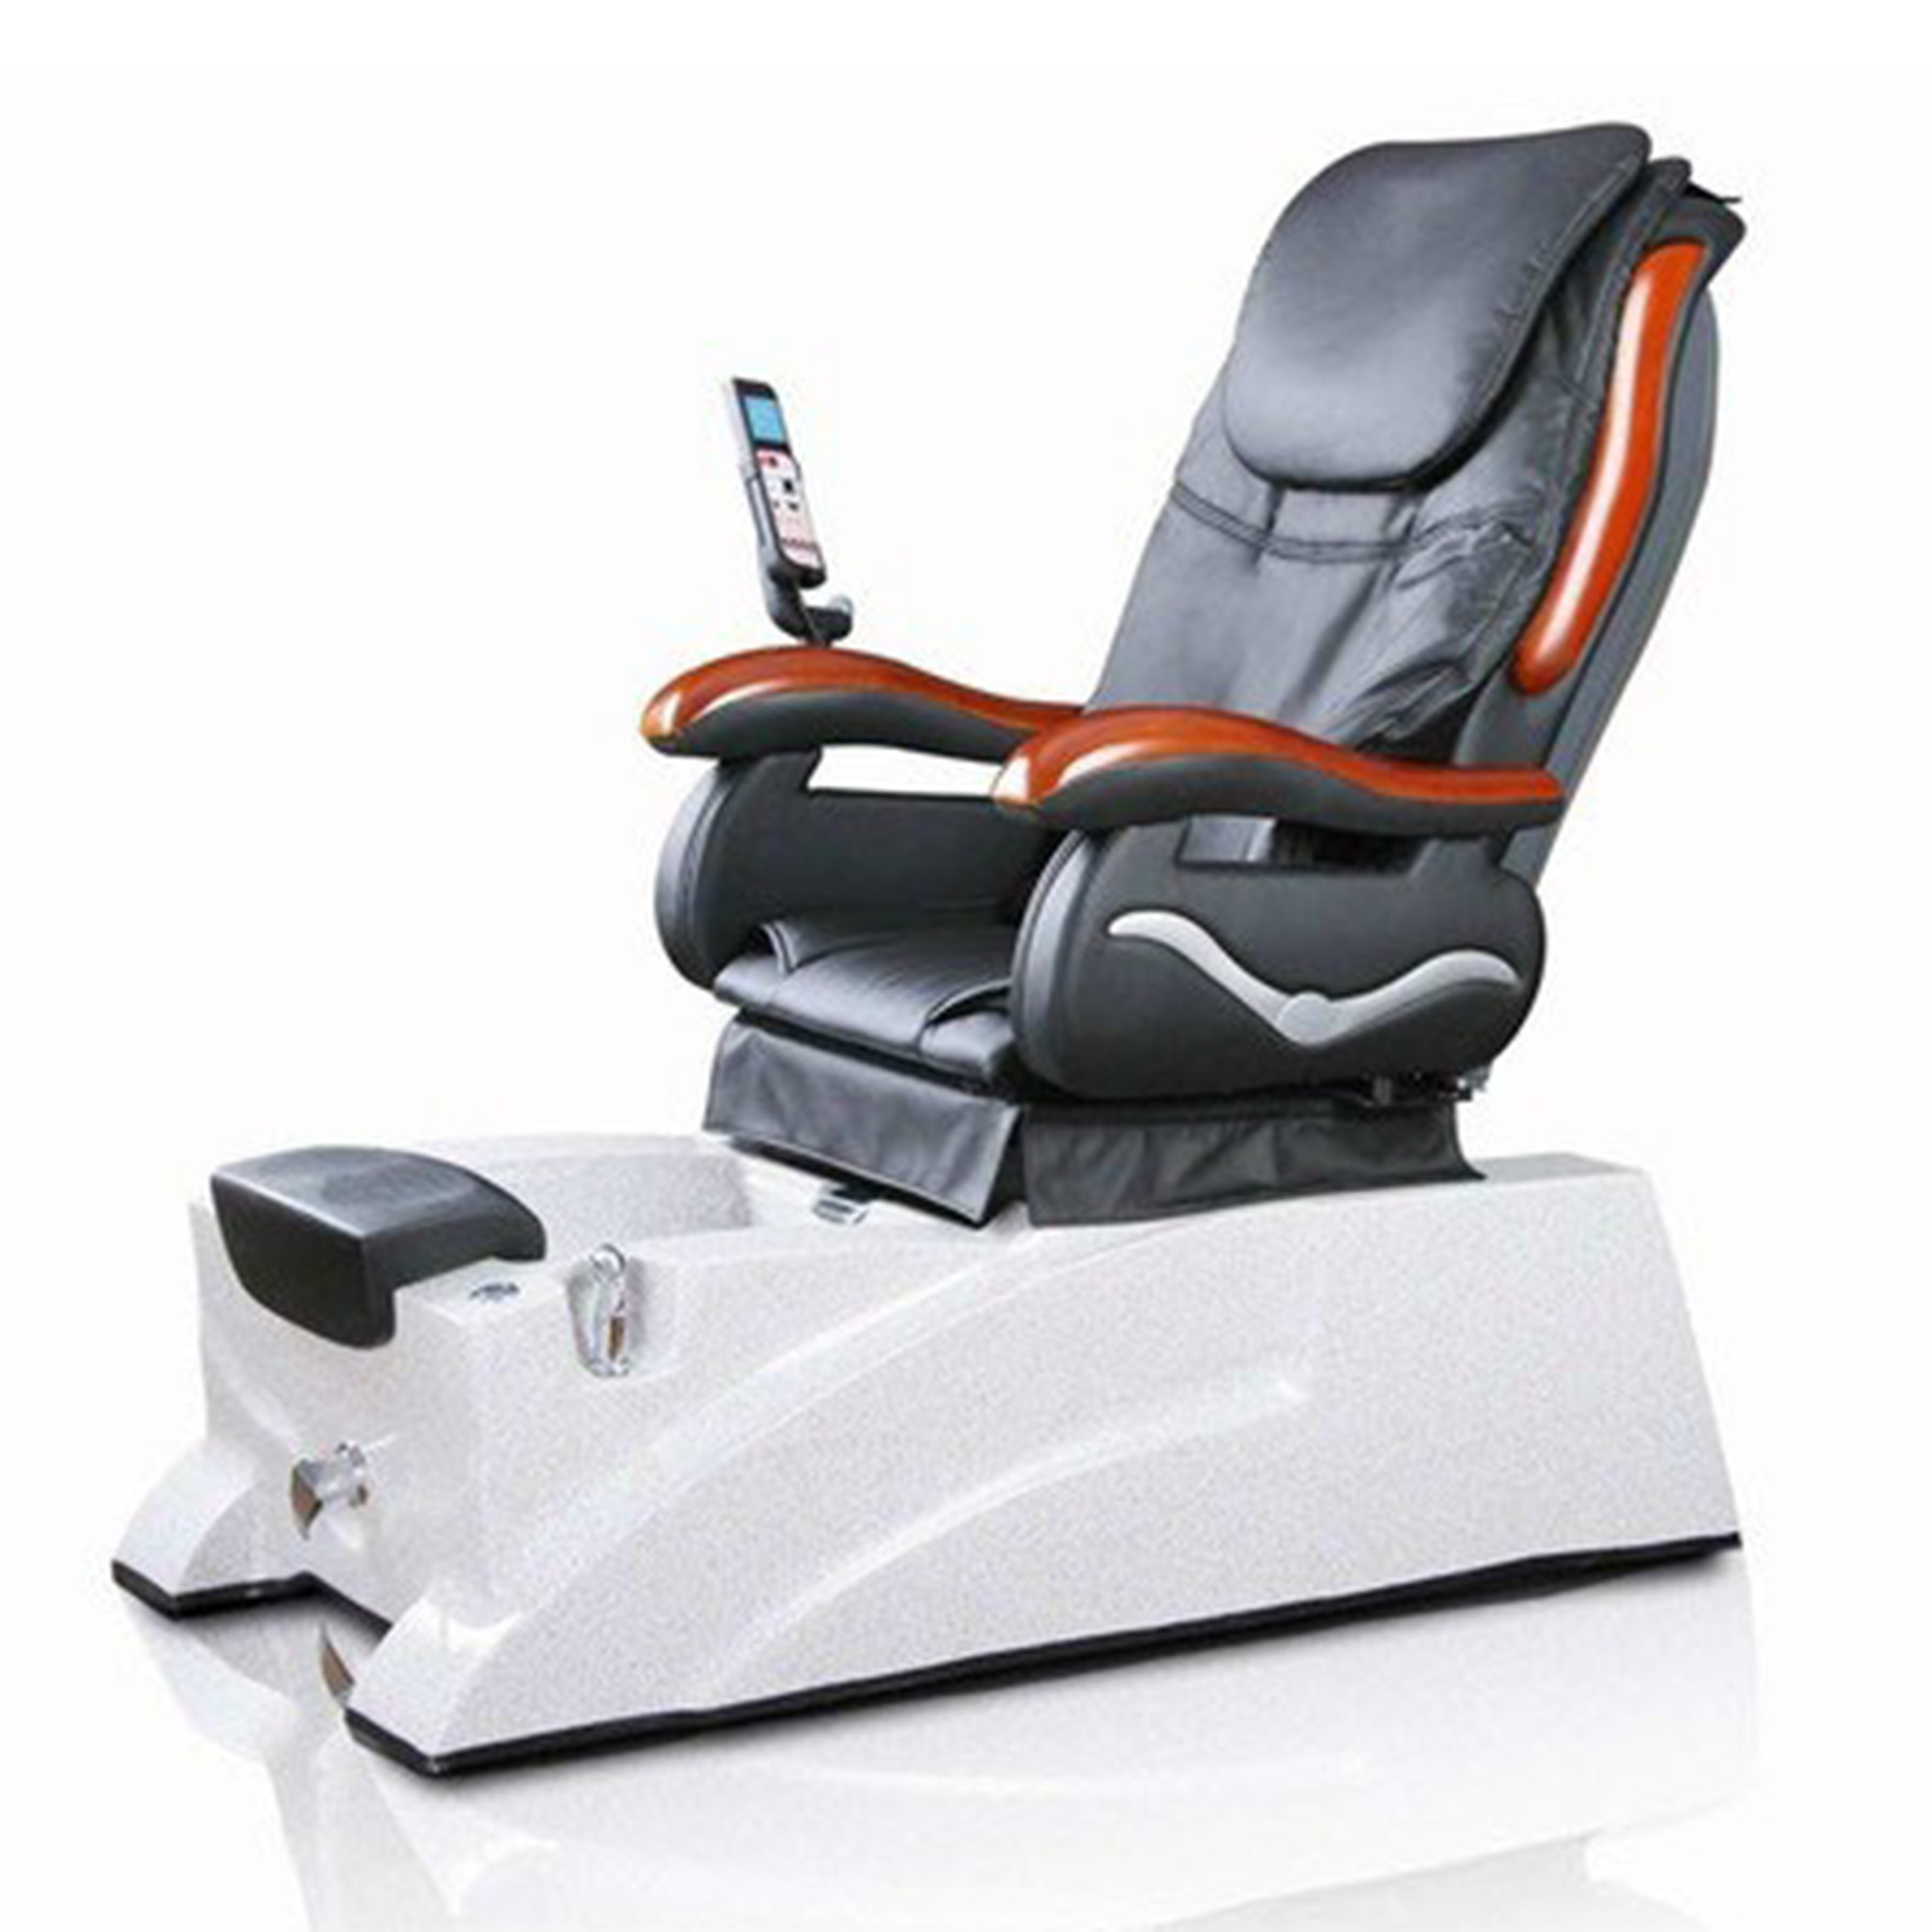 Comfort Pedicure Chair Furniture Stations in Ludhiana